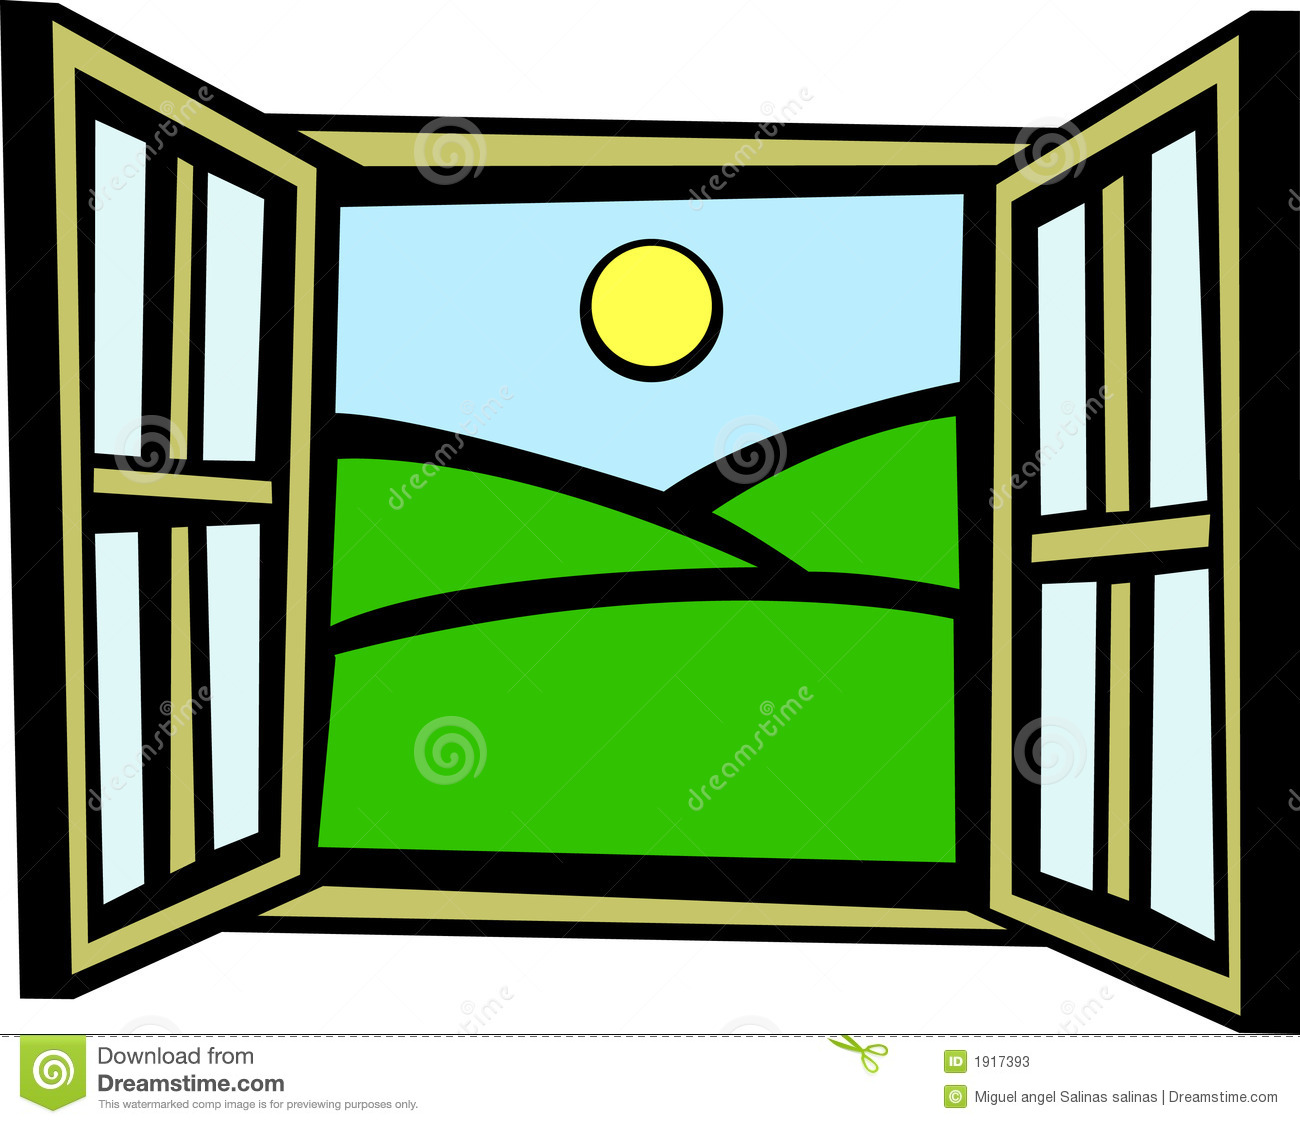 Window clipart free clipart i